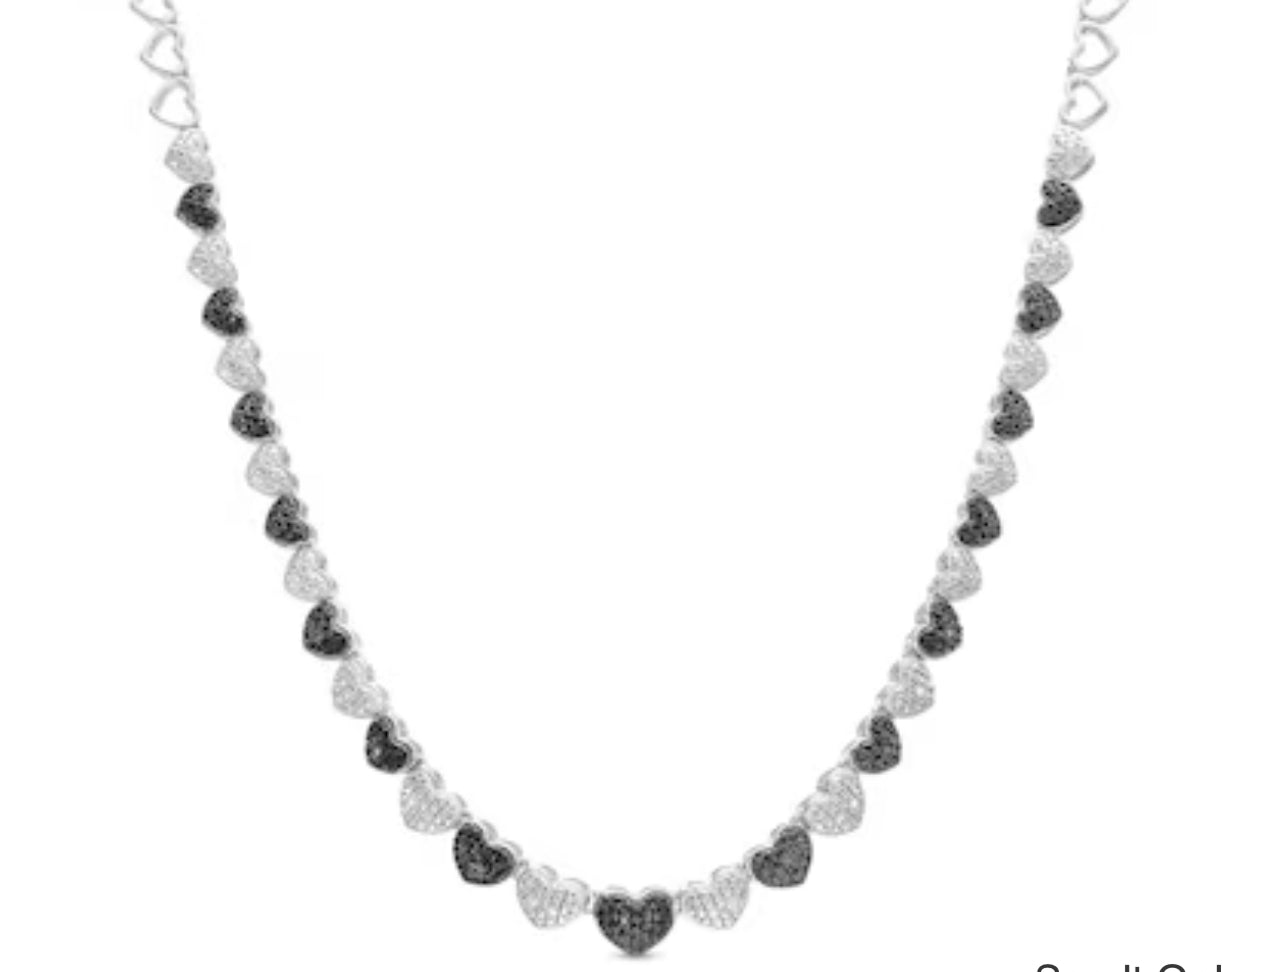 1/10 CT. T.W. Diamond Heart Necklace in Sterling Silver and 18K Rose Gold Plate - 16"